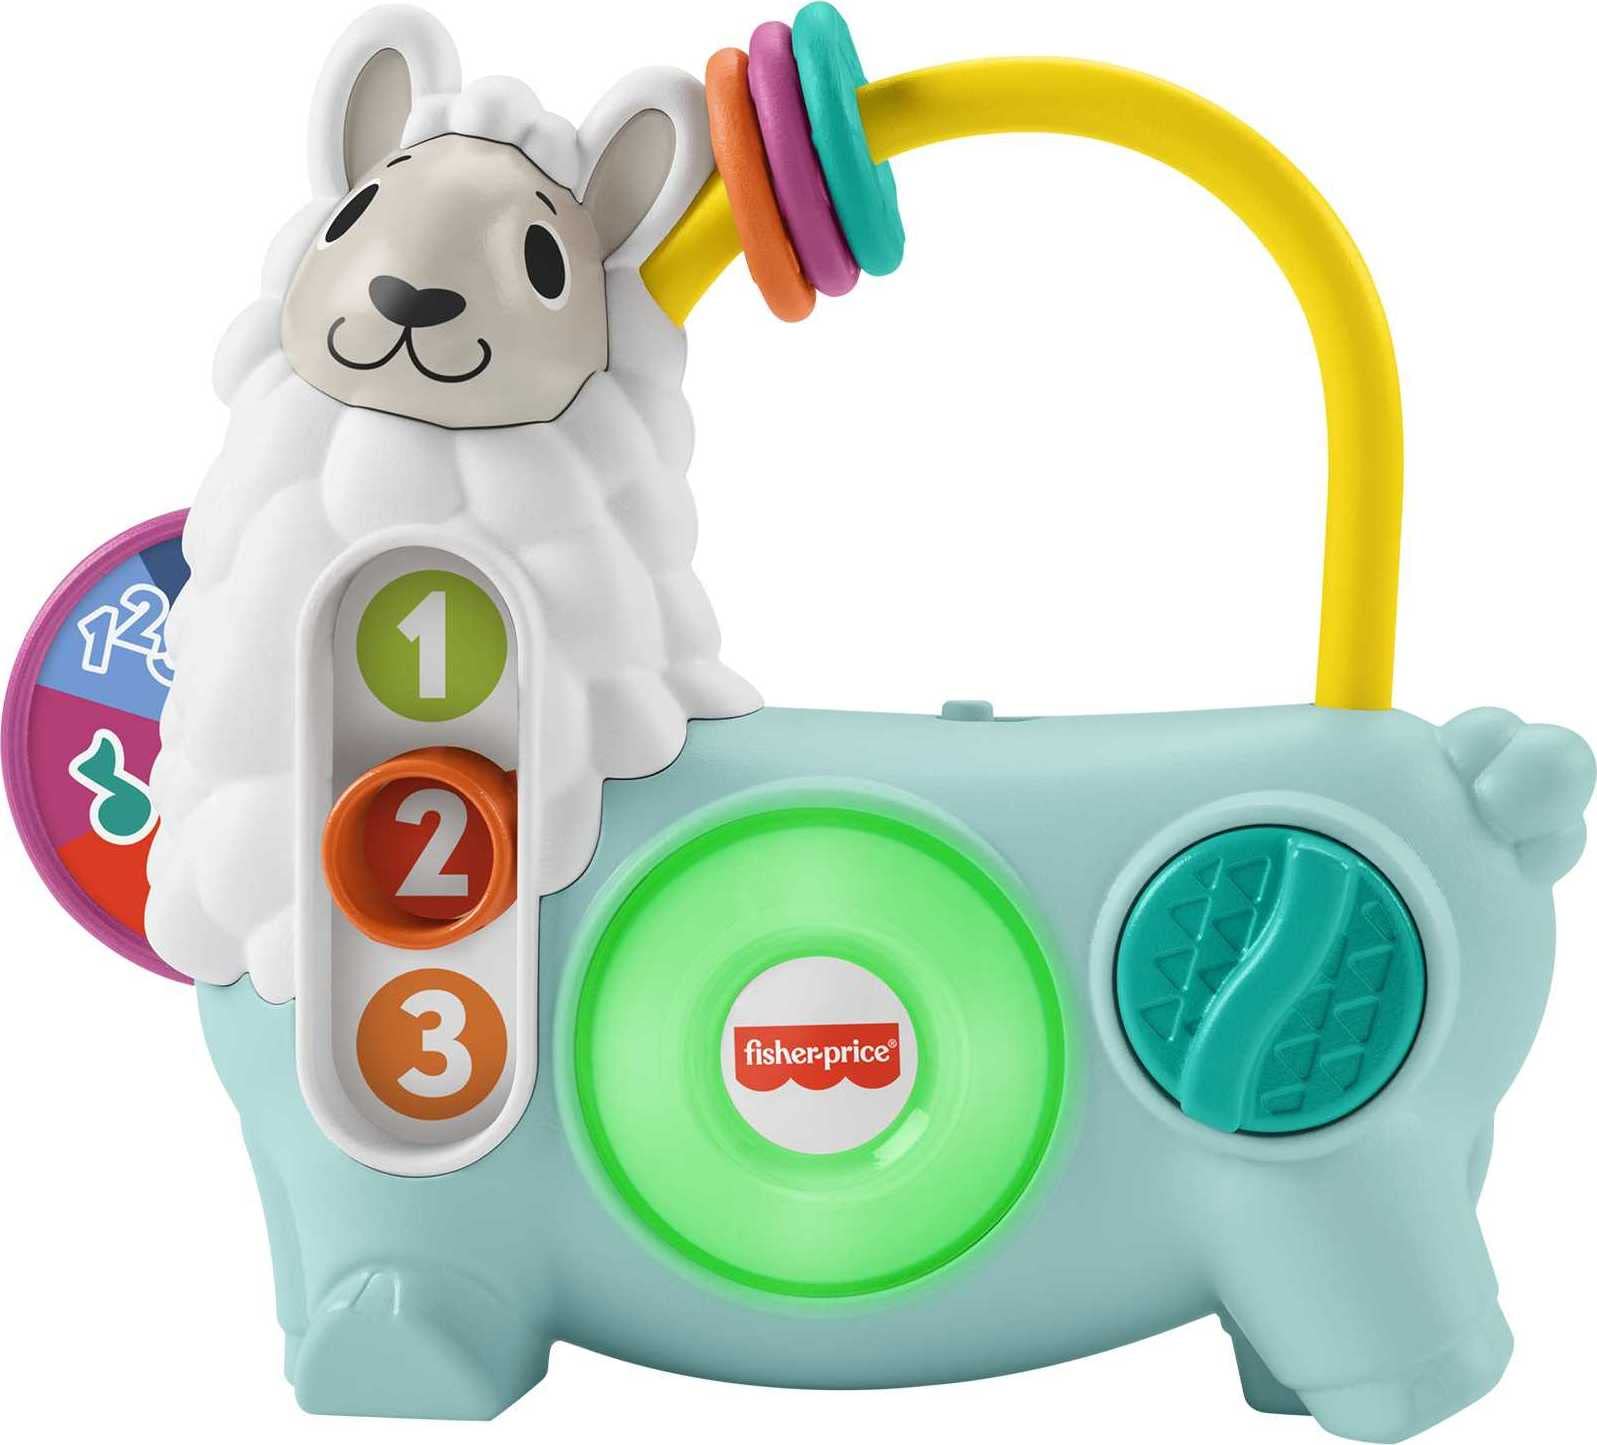 Fisher-Price Baby Linkimals Learning 123 Interactive Llama Toy w/ Lights & Music $9.50 + Free Shipping w/ Prime or on $35+